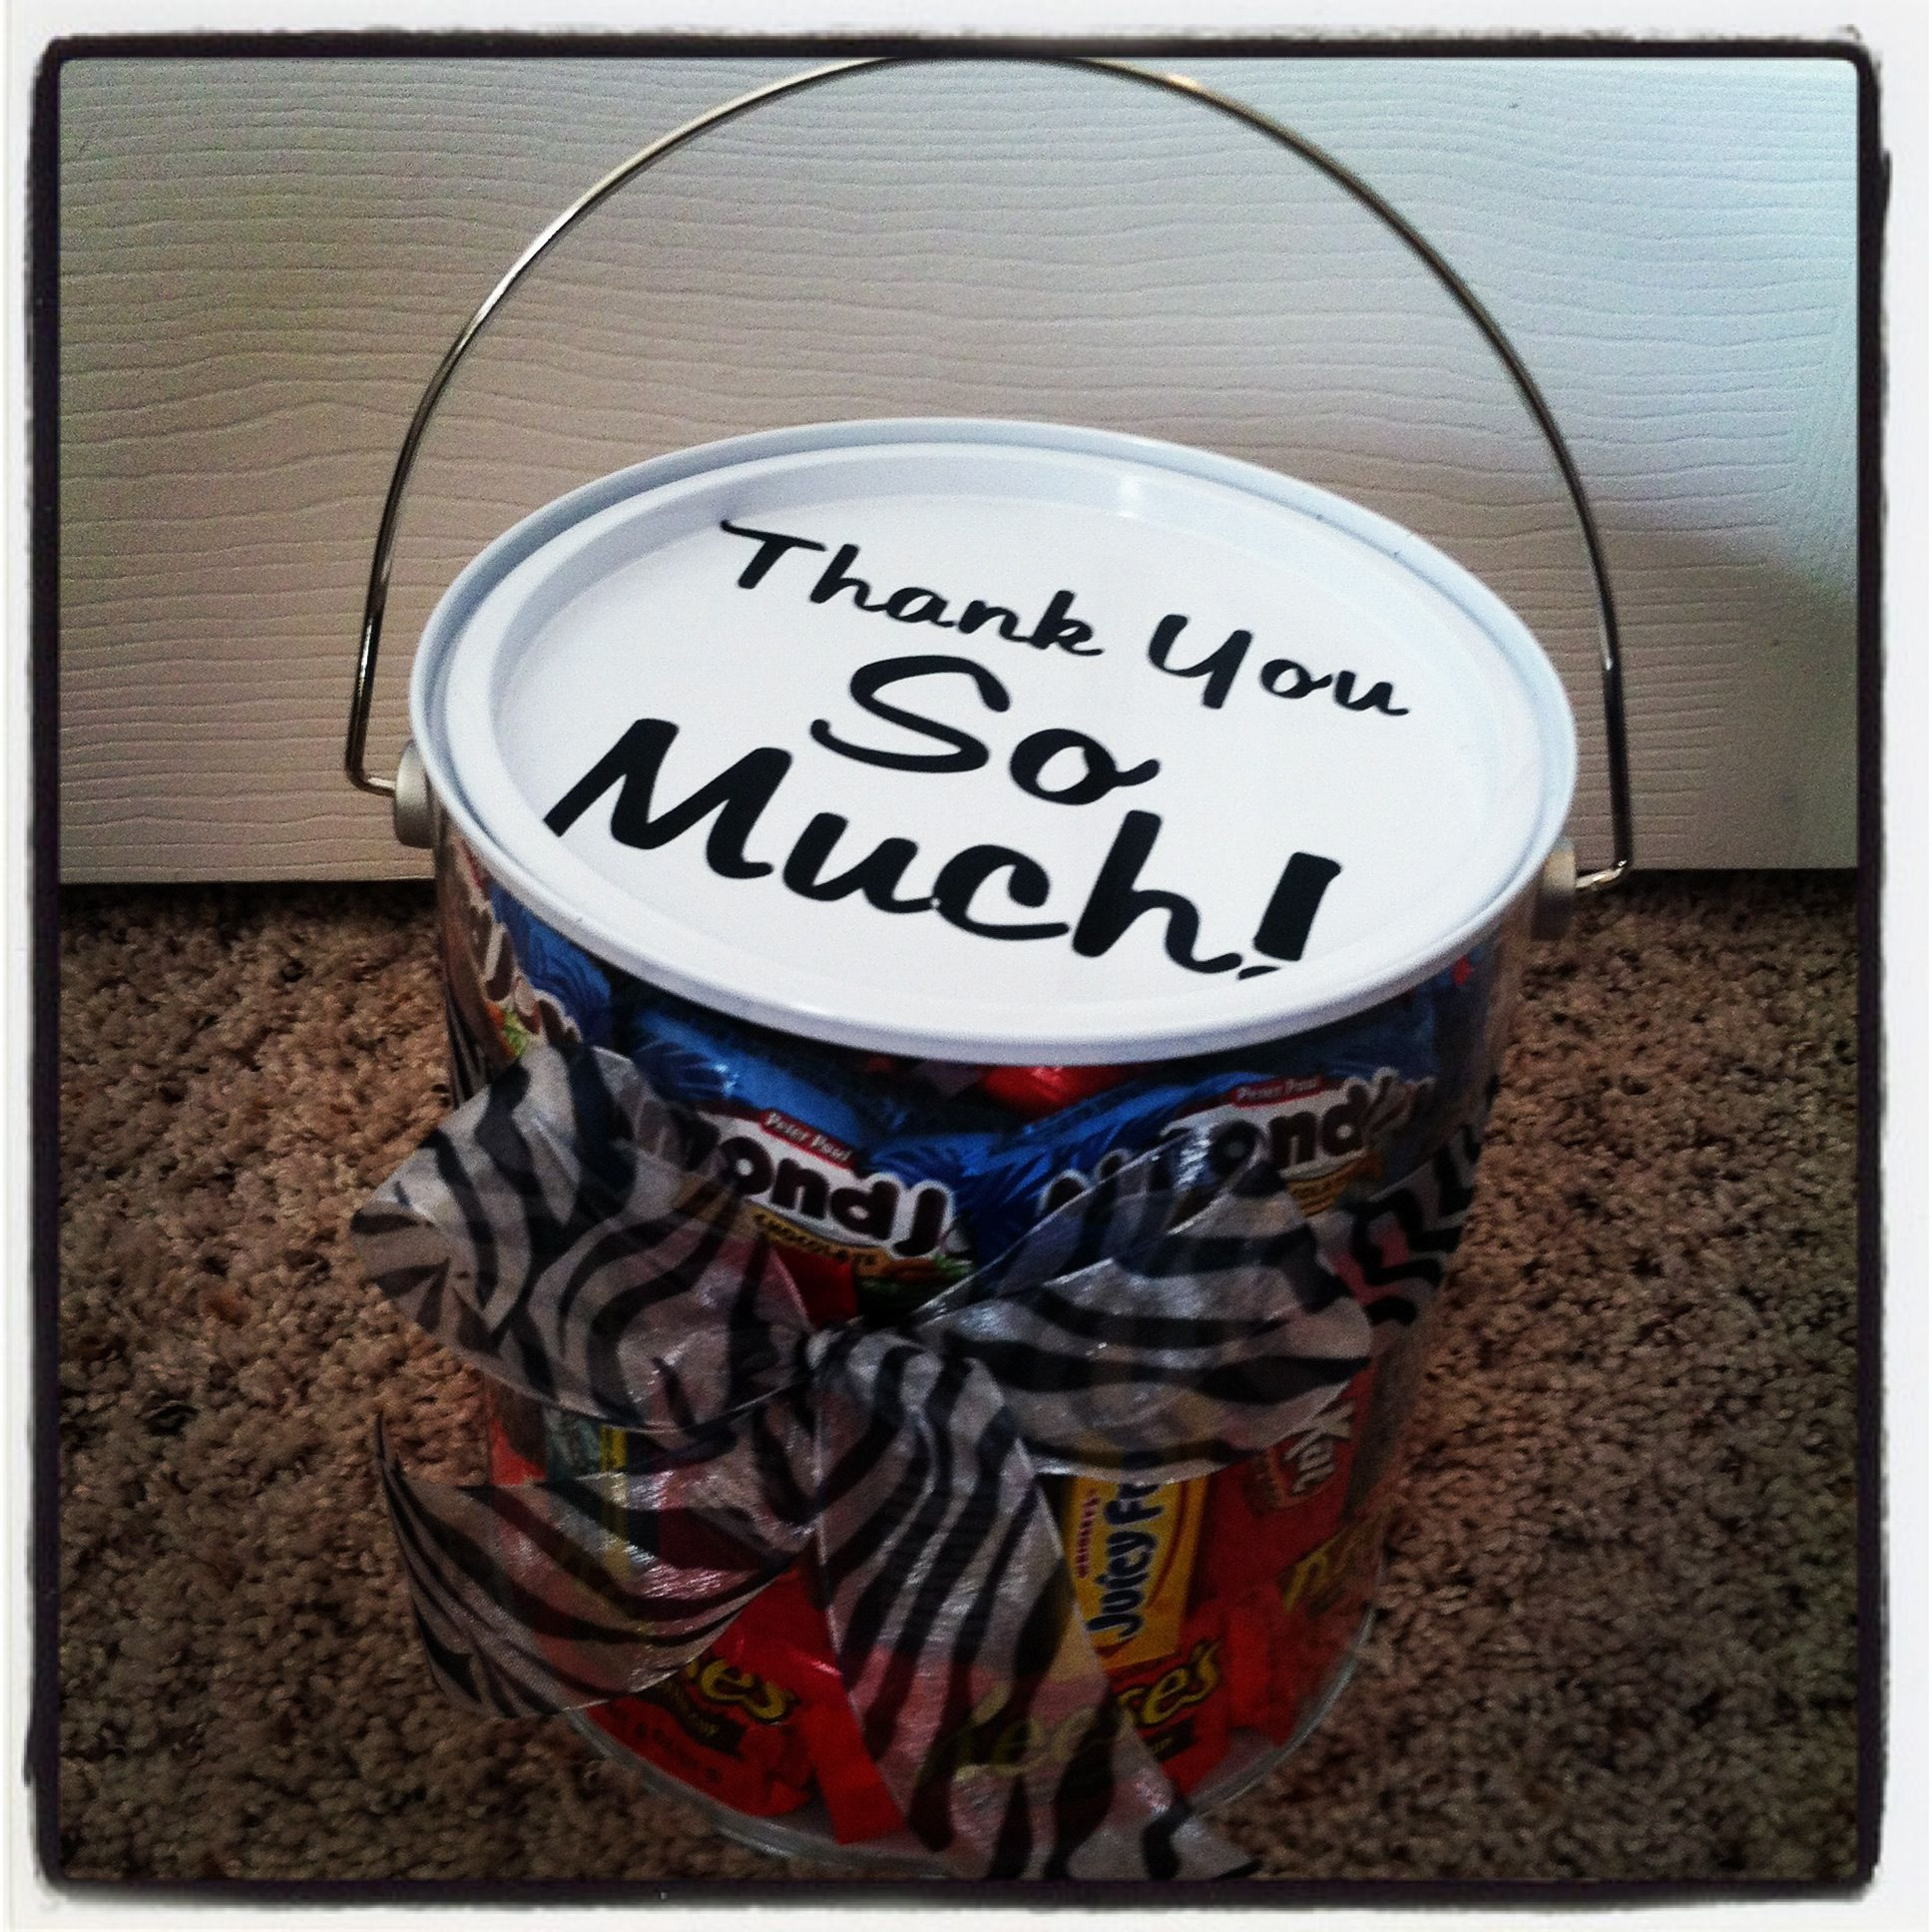 Thank You Gift Ideas For Coworkers
 "Thank you " Gift for coworkers t ideas